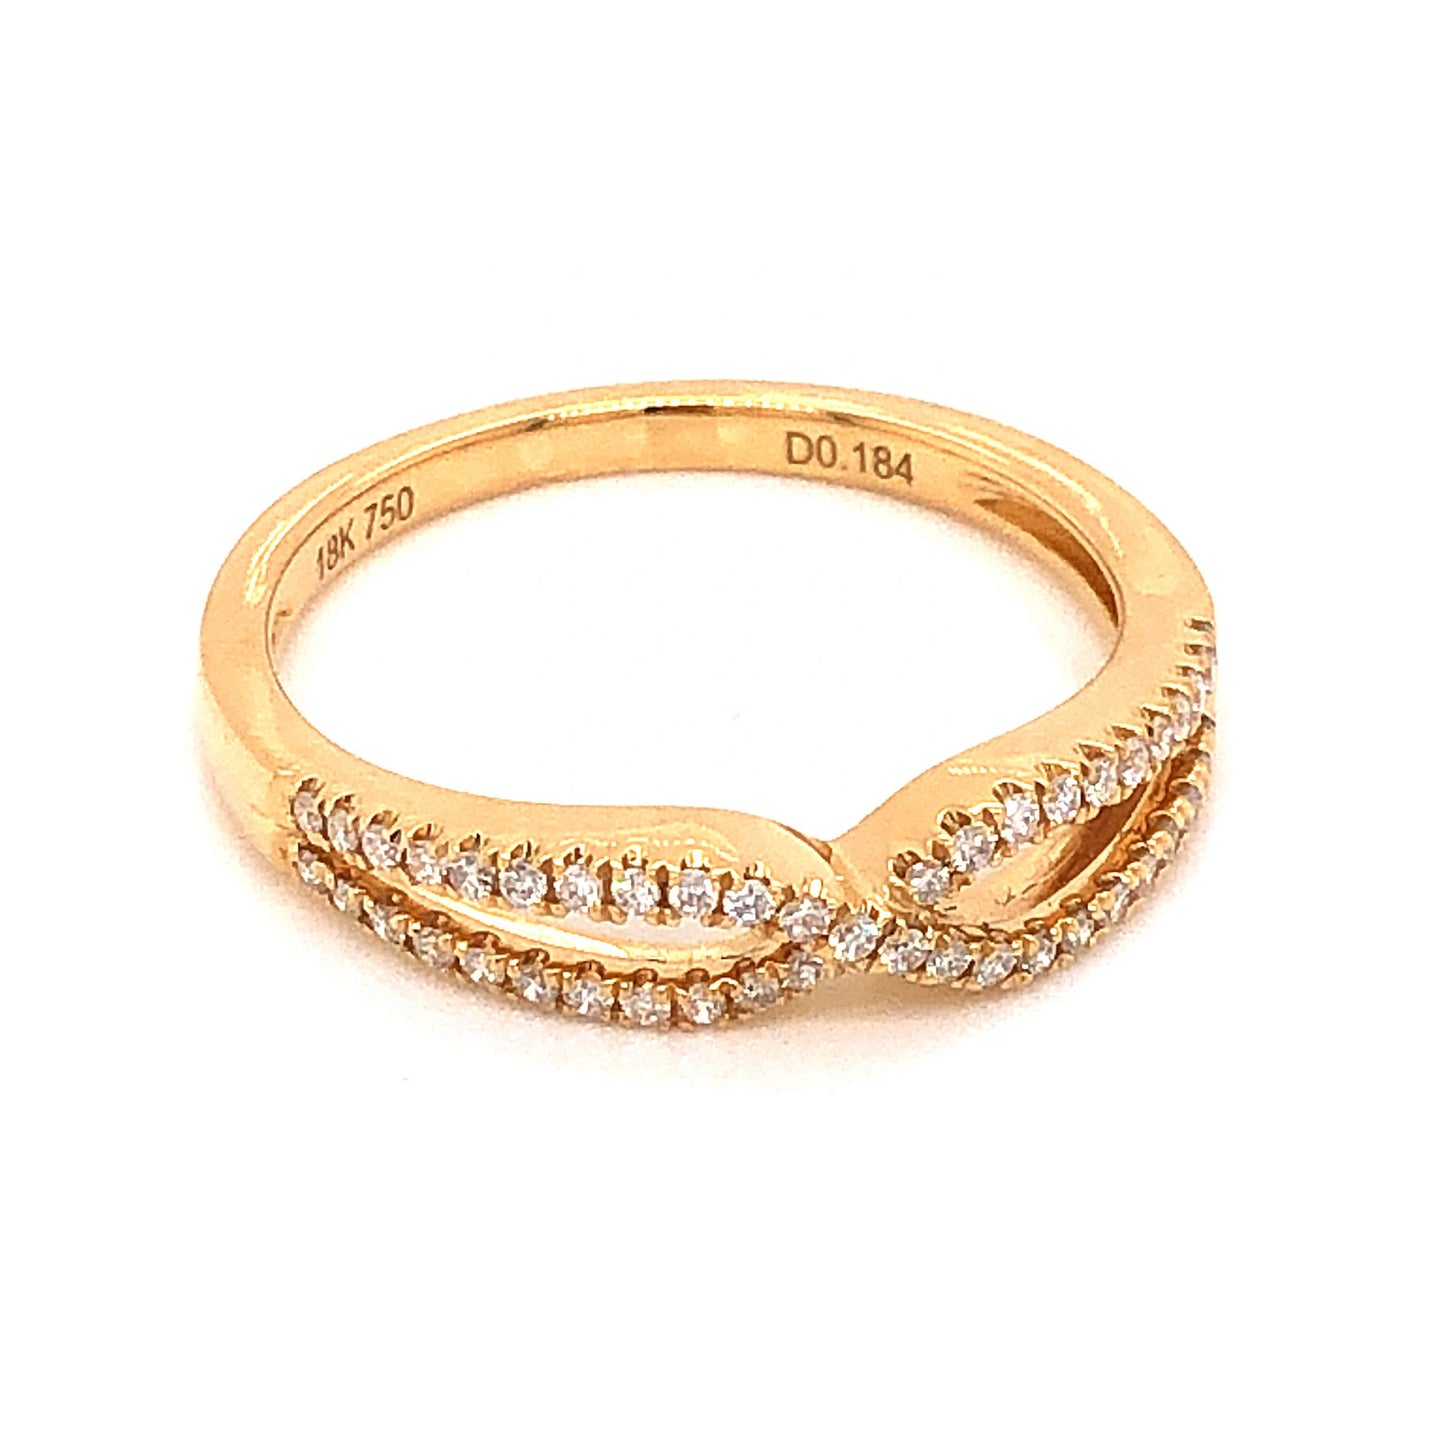 .18 Crossover Diamond Wedding Band in 18k Yellow Gold